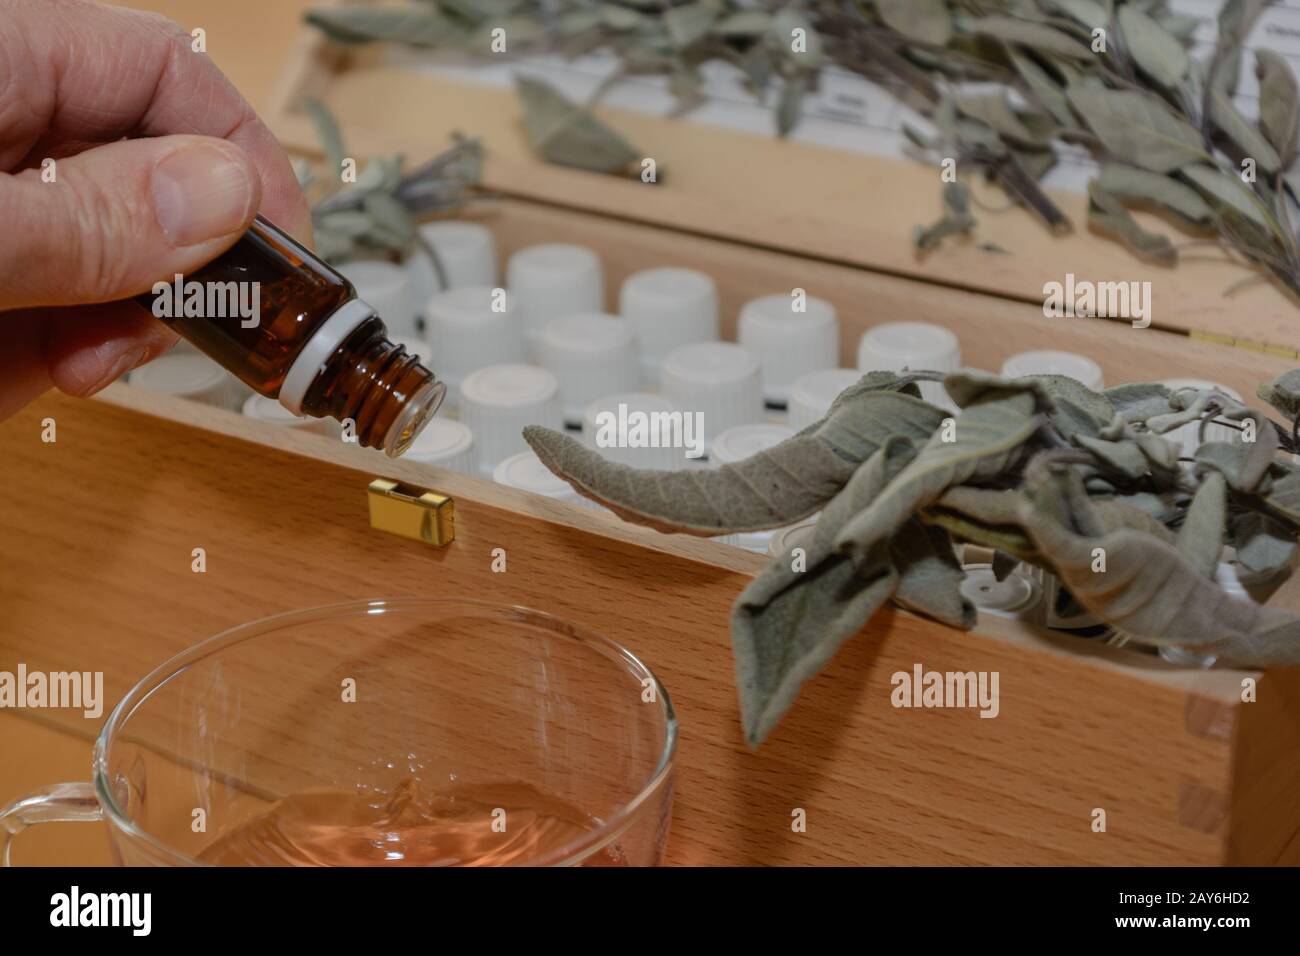 Brown medicine bottle over liquid - sage and other medicine bottles in the background Stock Photo